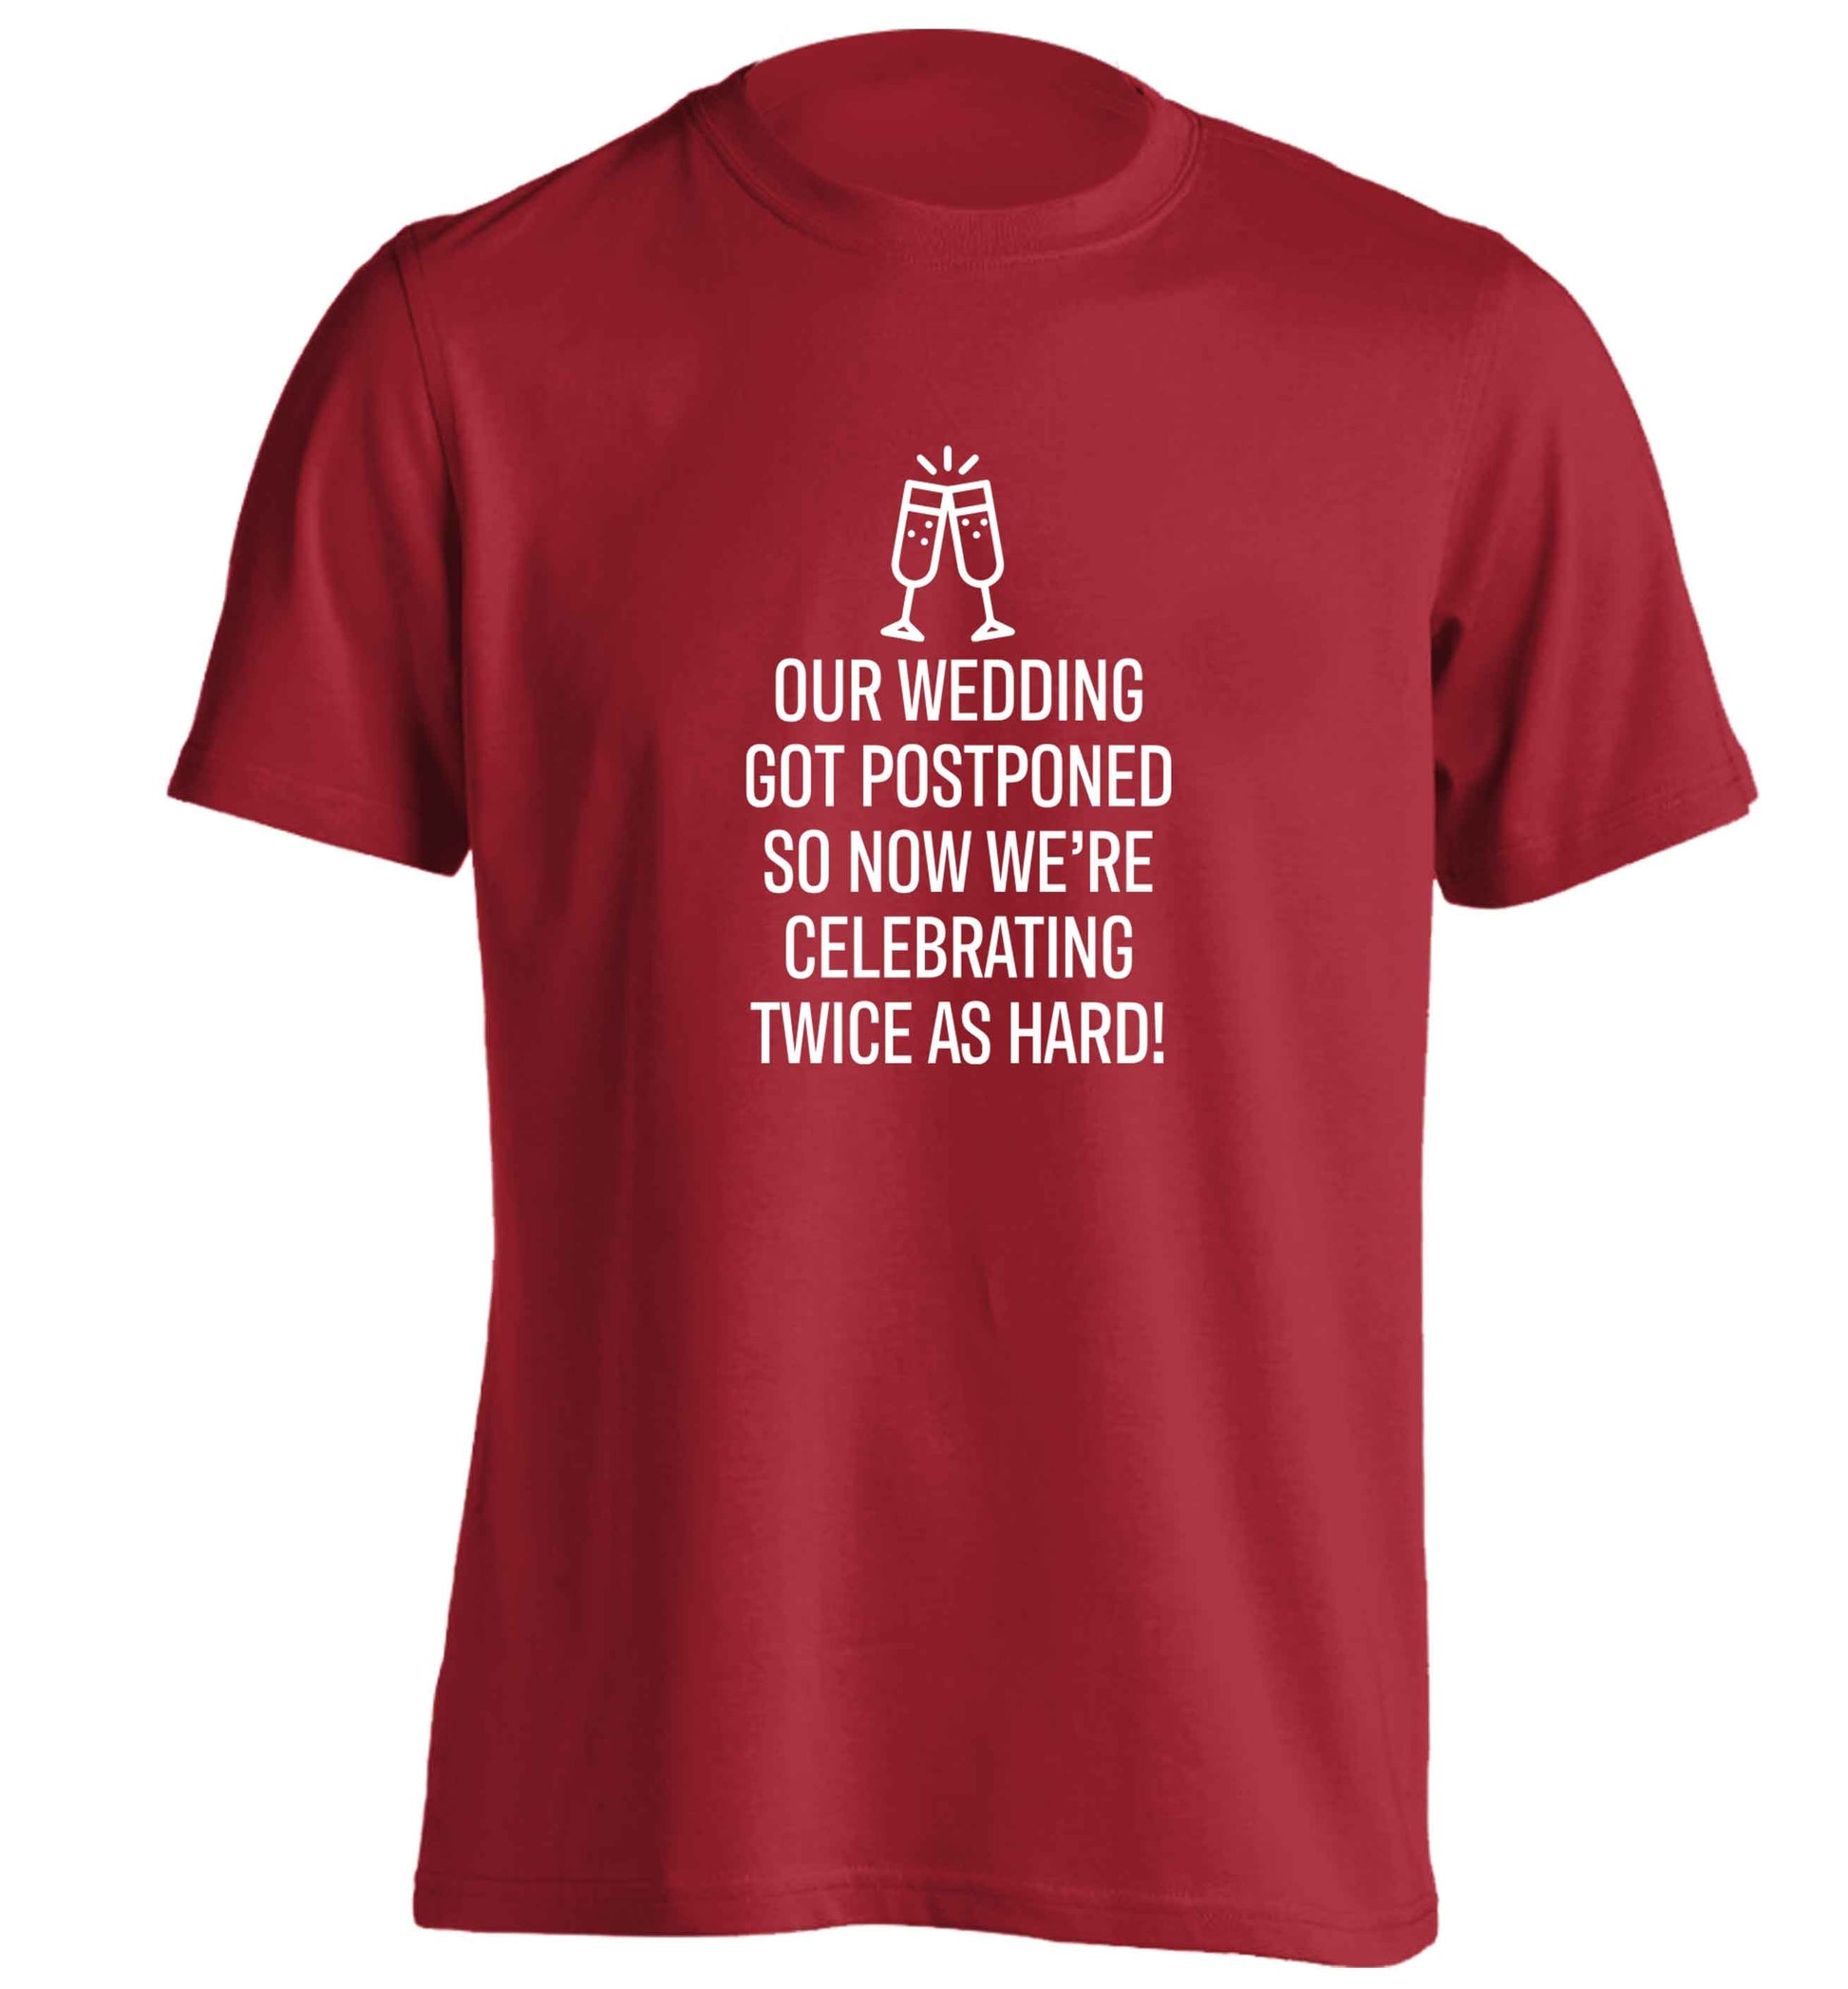 Postponed wedding? Sounds like an excuse to party twice as hard!  adults unisex red Tshirt 2XL